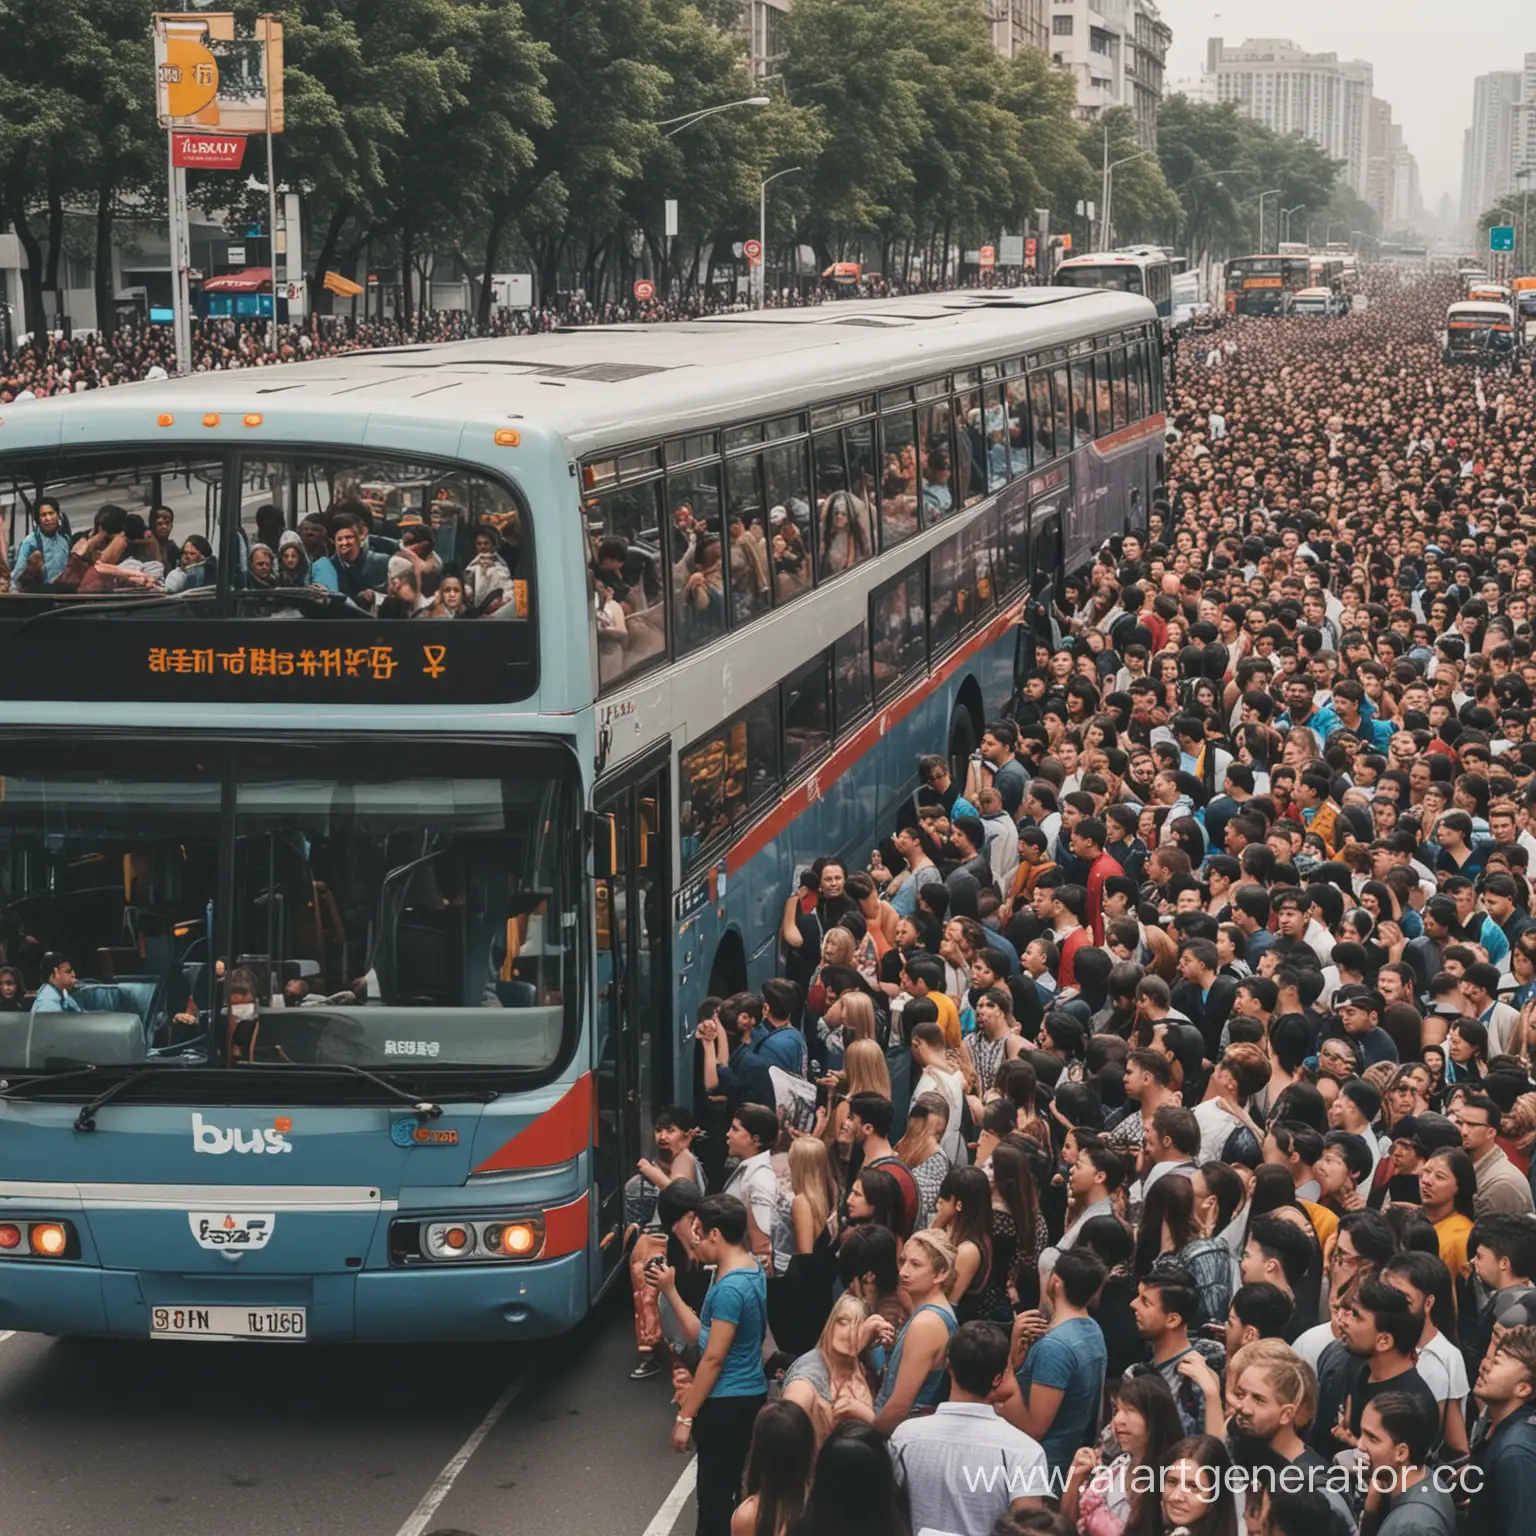 Crowded-City-Bus-with-Diverse-Passengers